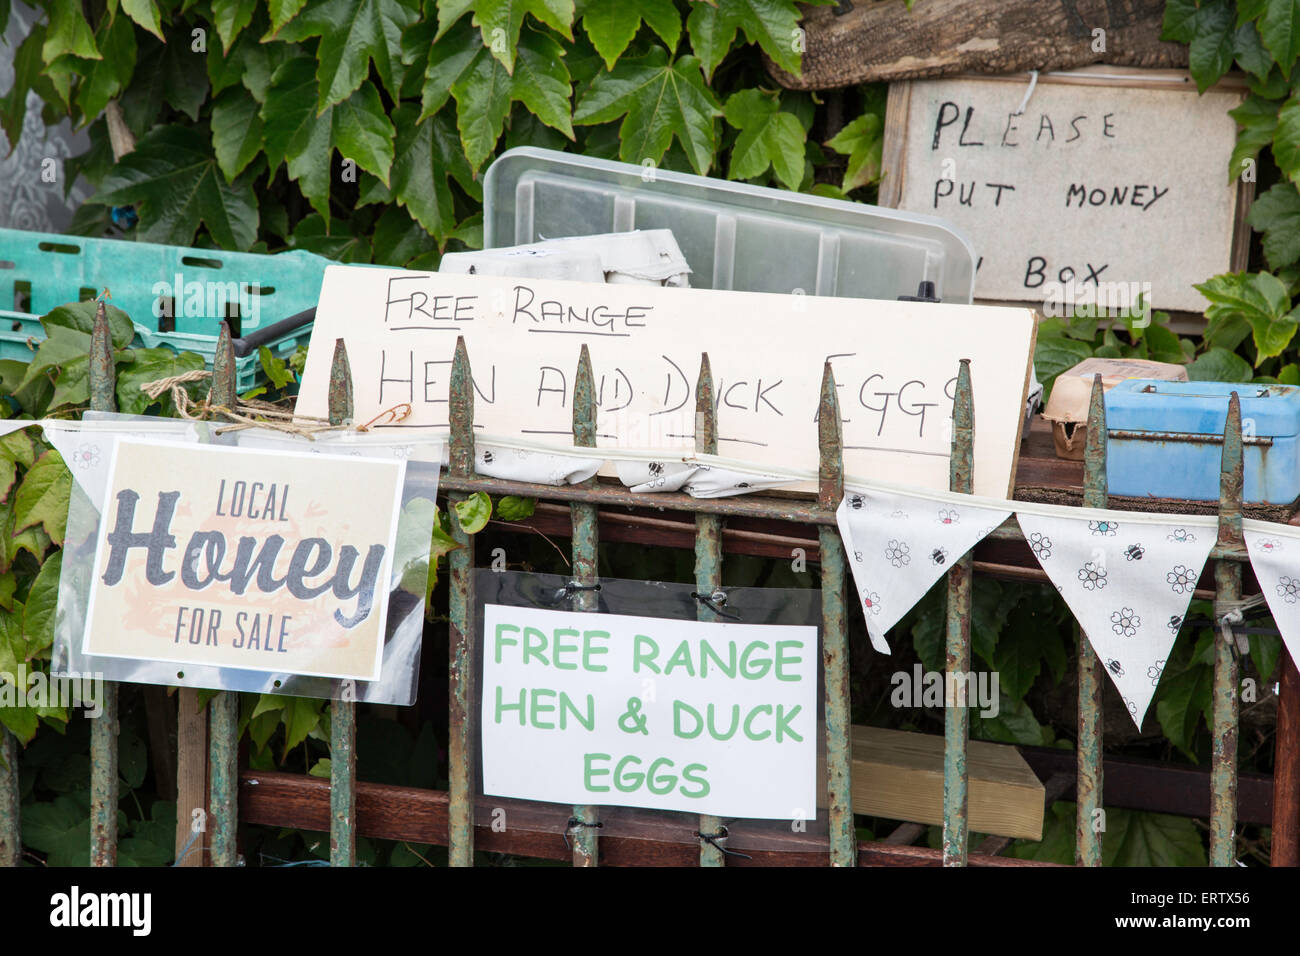 Local produce for sale at a cottage gate, England, UK Stock Photo